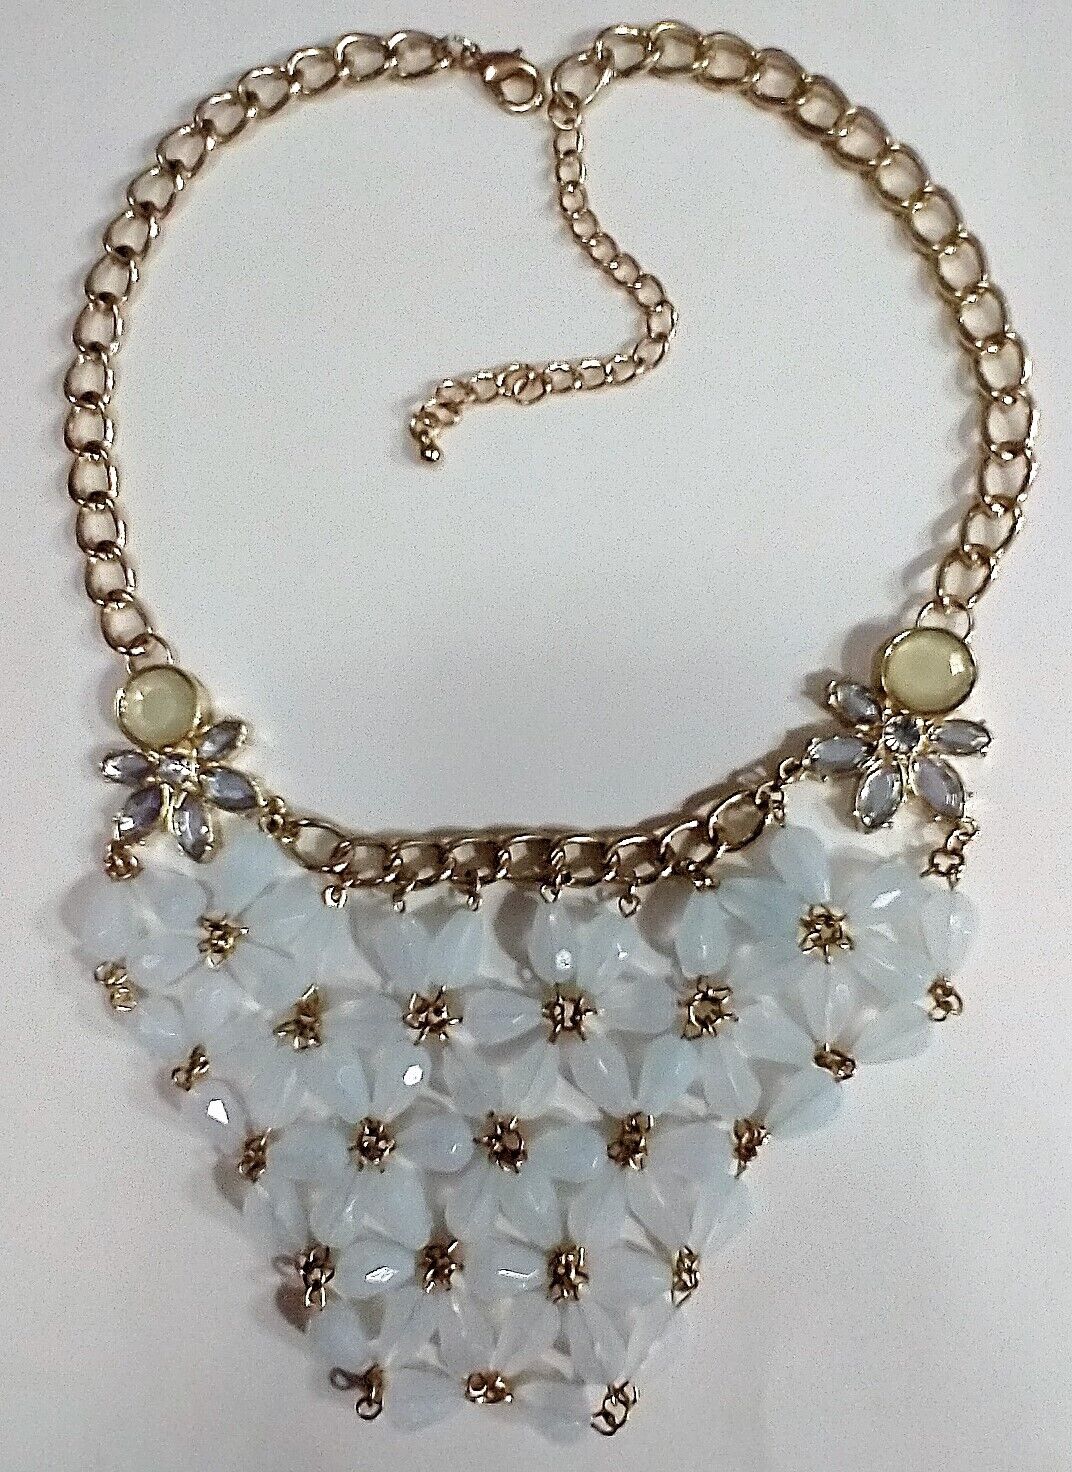 Vintage Necklace Choker Semi-Opaque Bead Work To Form Flower Patterns Gold-Tone